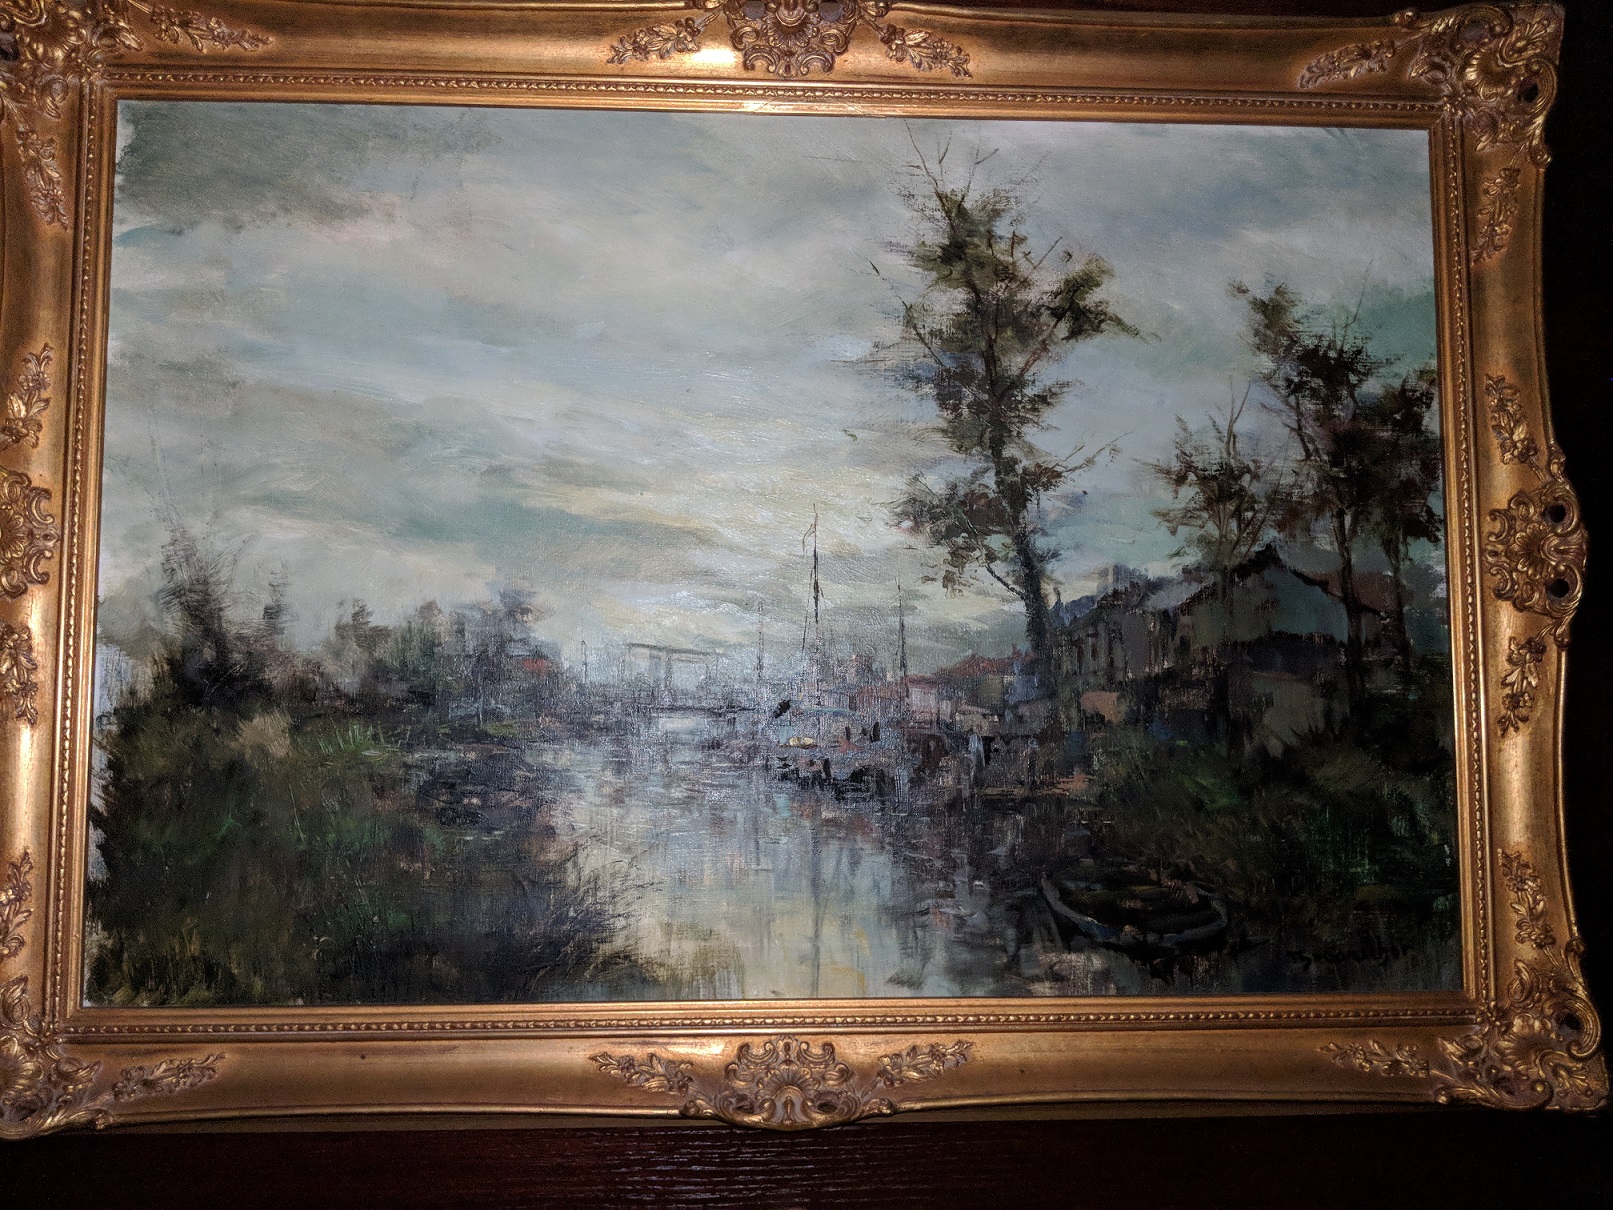 Need help identifying the artist by signature - oil painting | Antiques